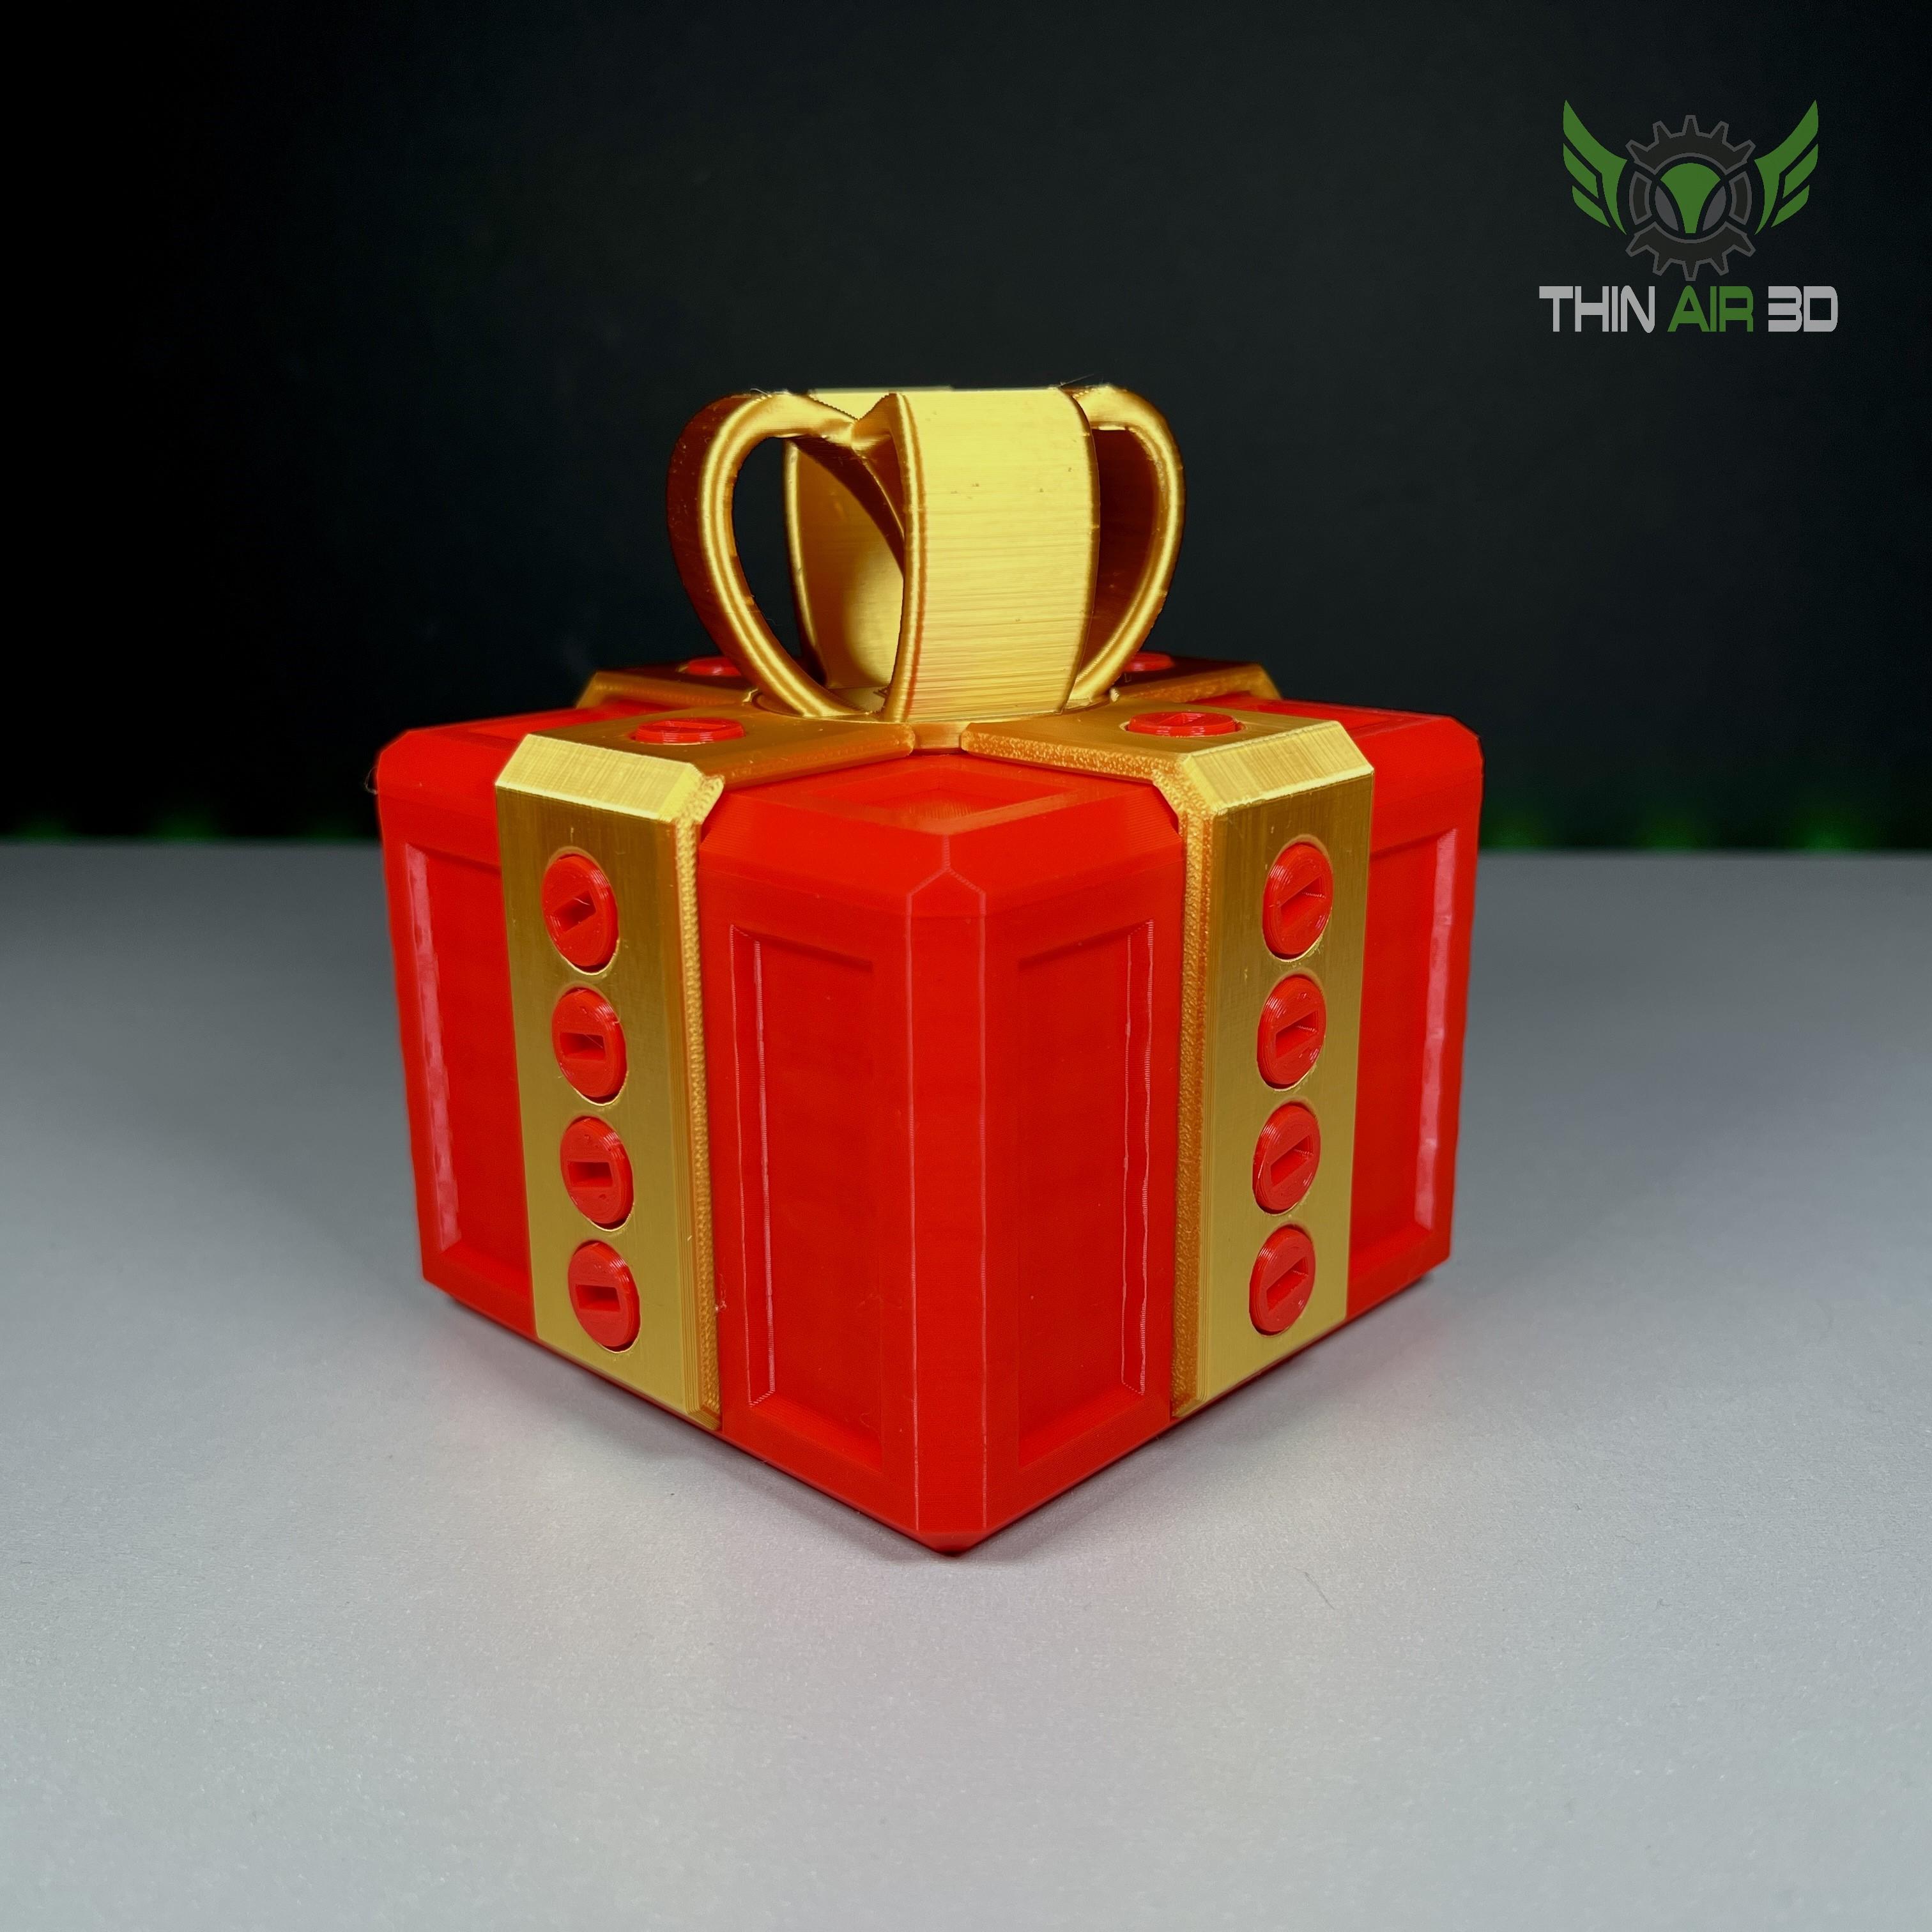 Small cute gift box remix by Third Dimension, Download free STL model